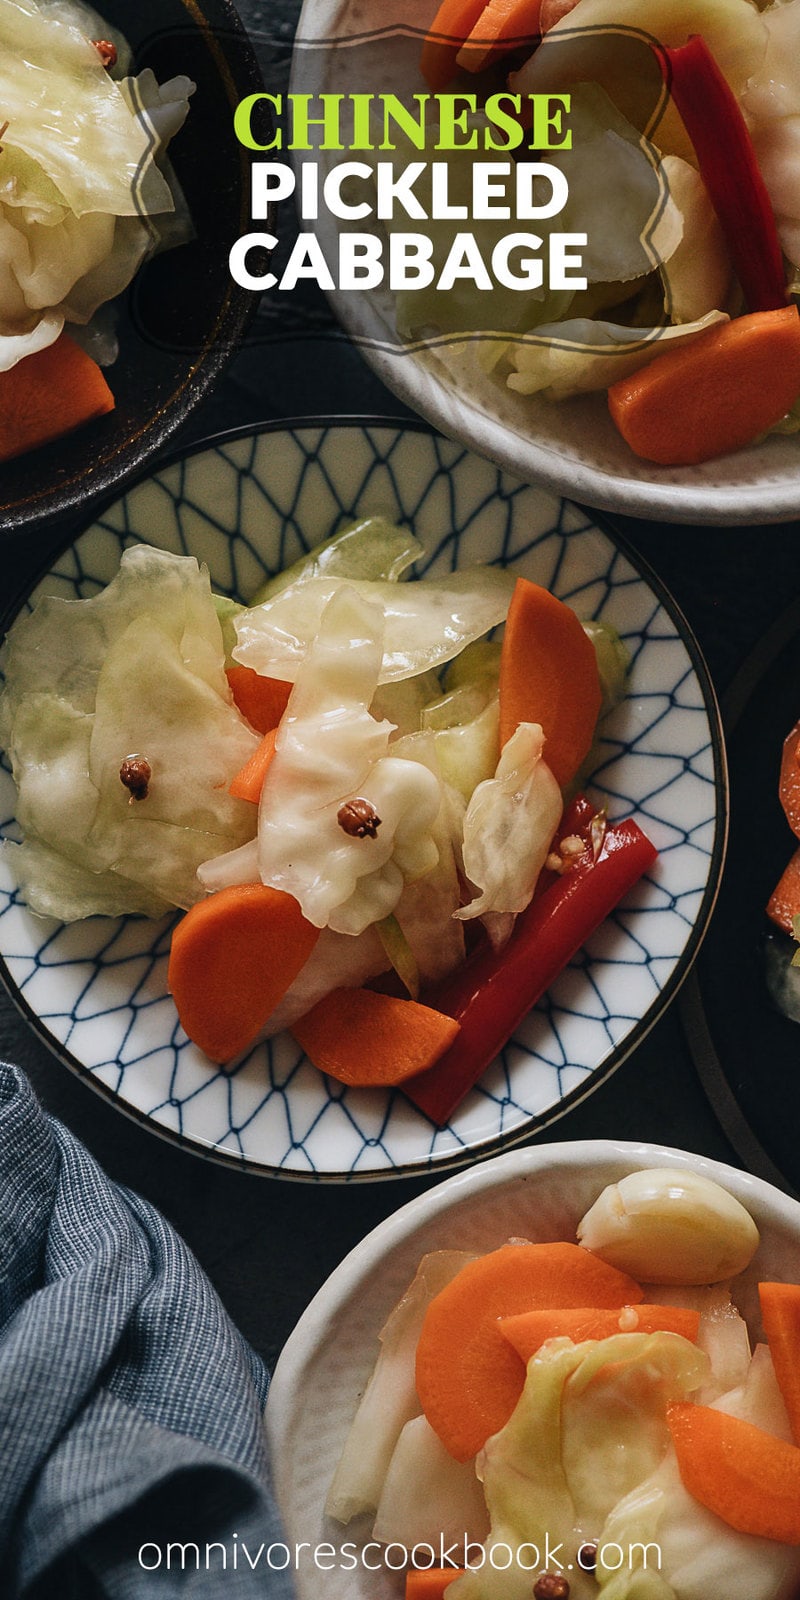 Chinese Pickled Cabbage (A Quick Pickle Recipe) | Make crunchy Chinese pickled cabbage with this quick pickle recipe. It is so easy to prepare, and the result is a well-balanced crisp sweet and sour pickle just like the appetizer you’d get at a Chinese restaurant. {Vegan, Gluten-Free}